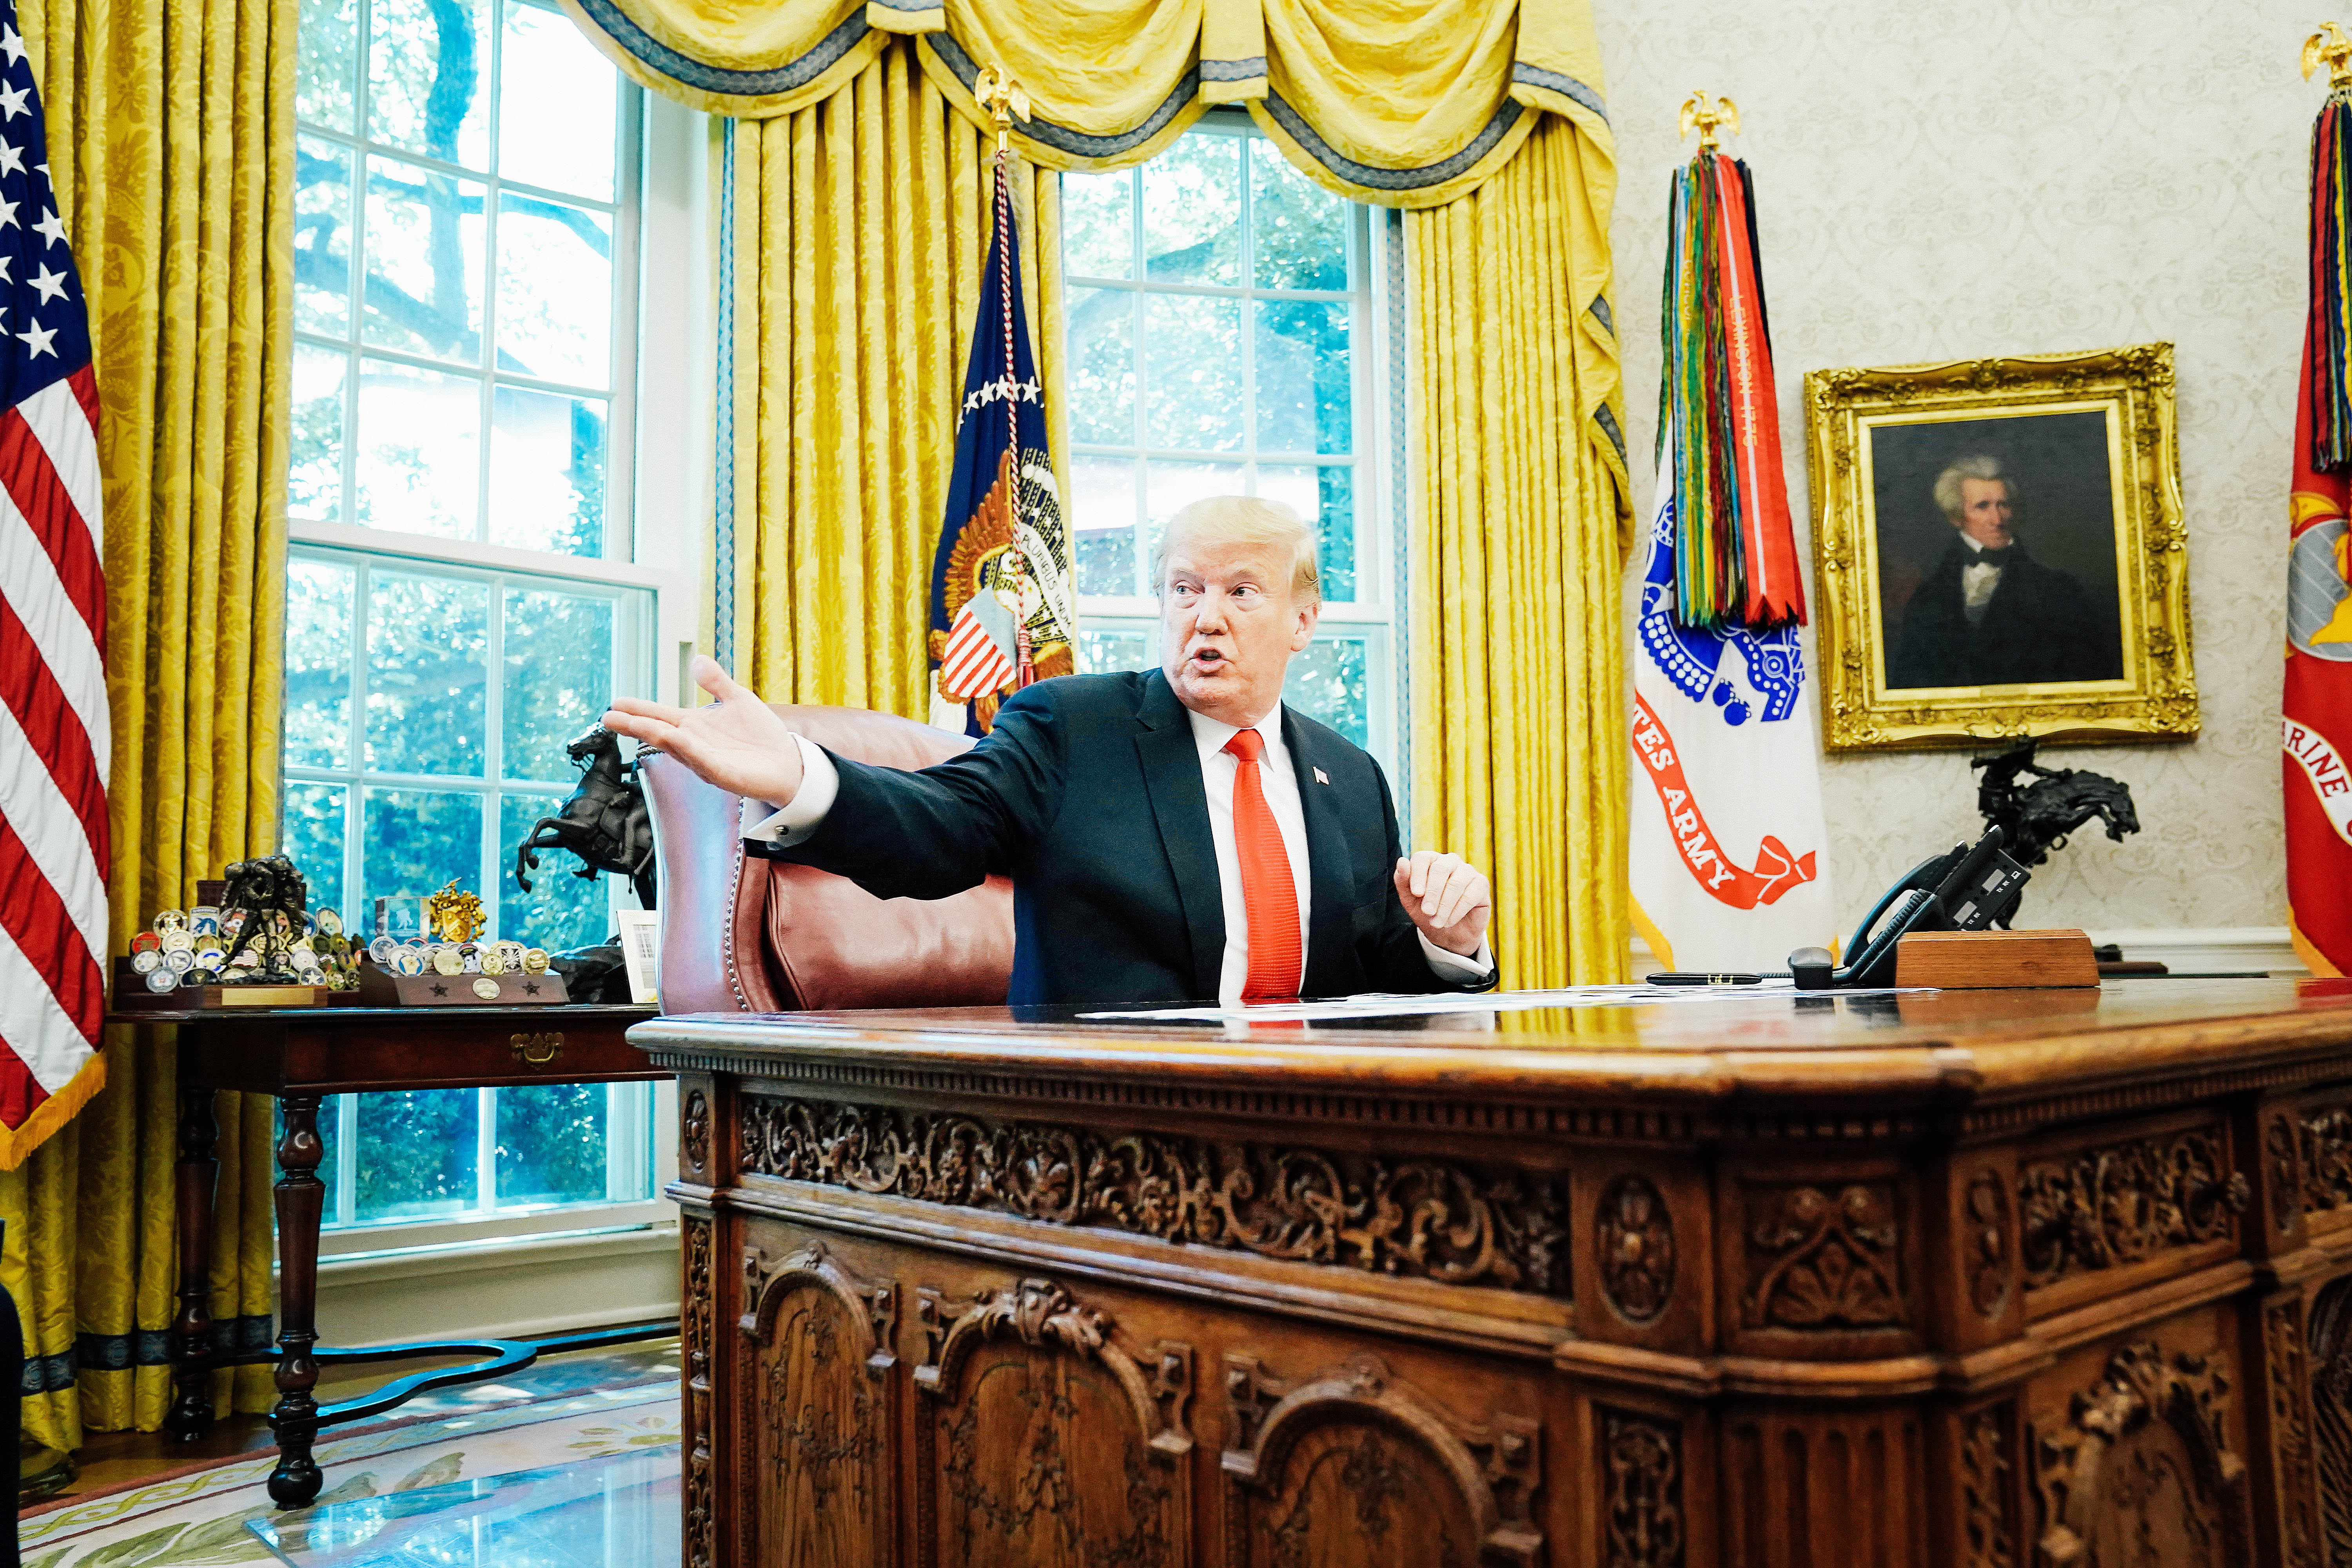 Donald Trump gestures while sitting at his desk in the Oval Office.